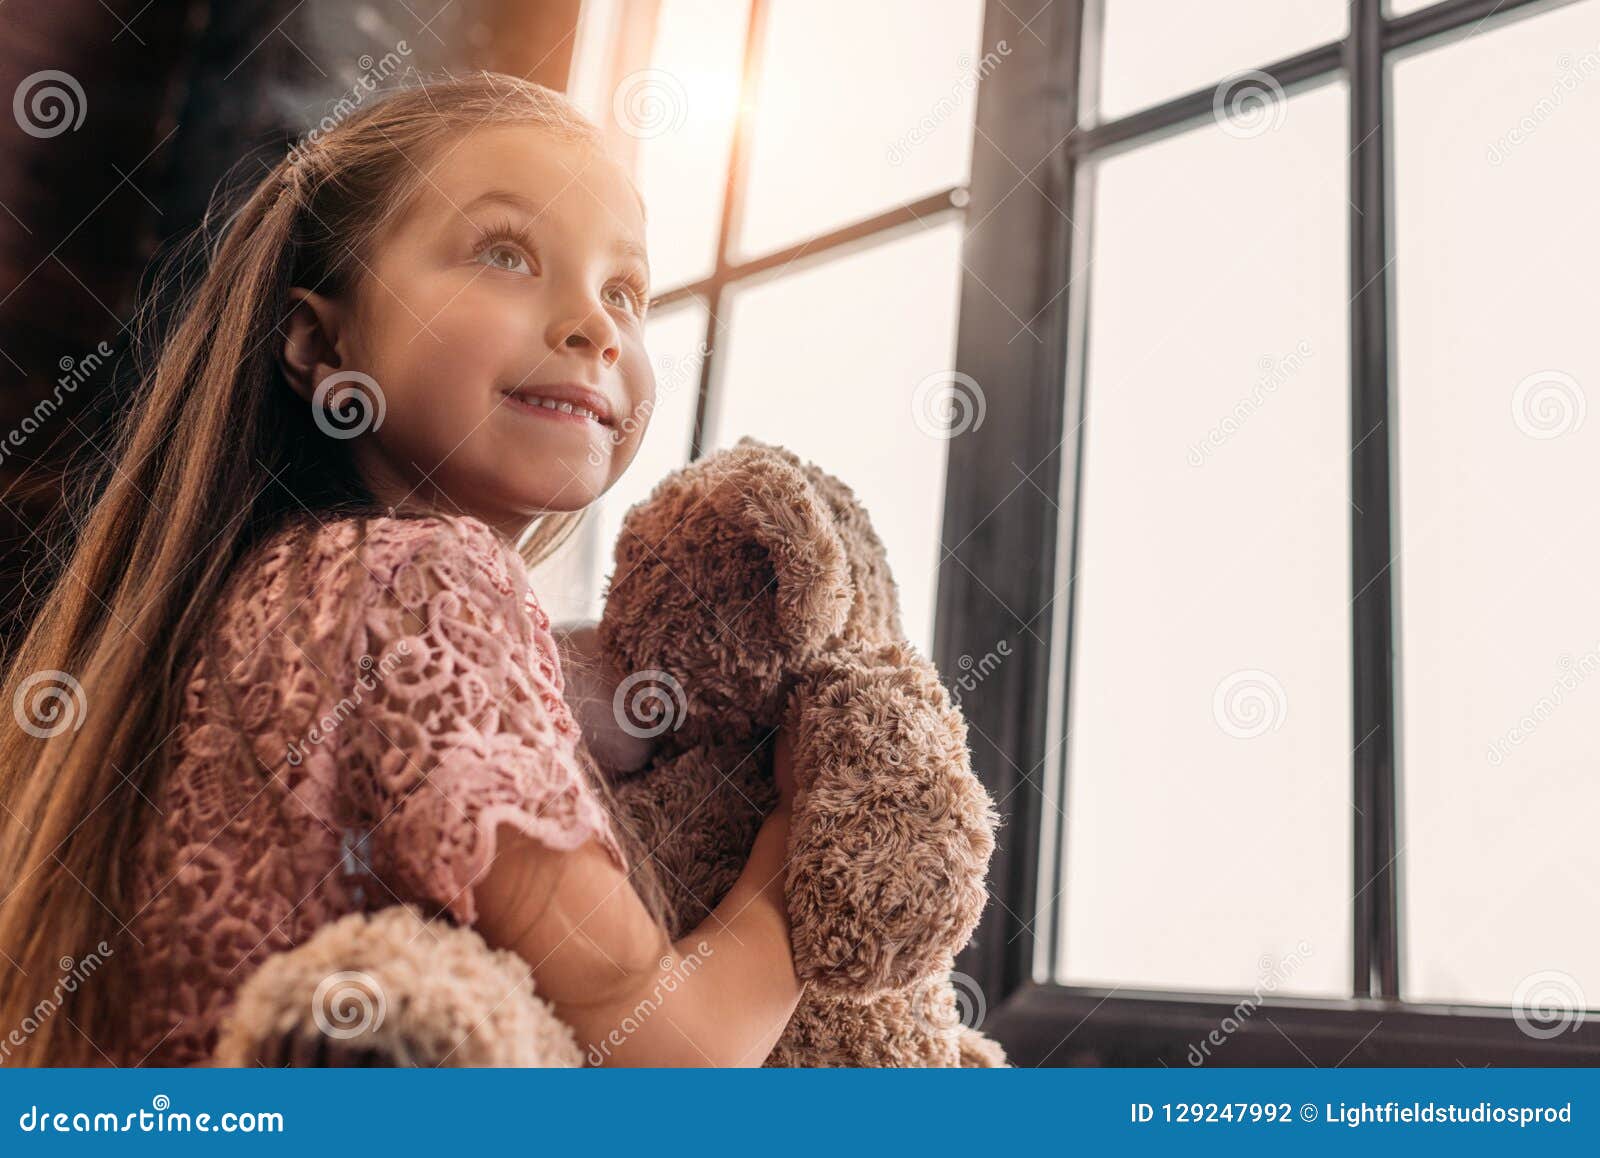 Happy Little Child Playing With Teddy Bear Stock Photo Image Of